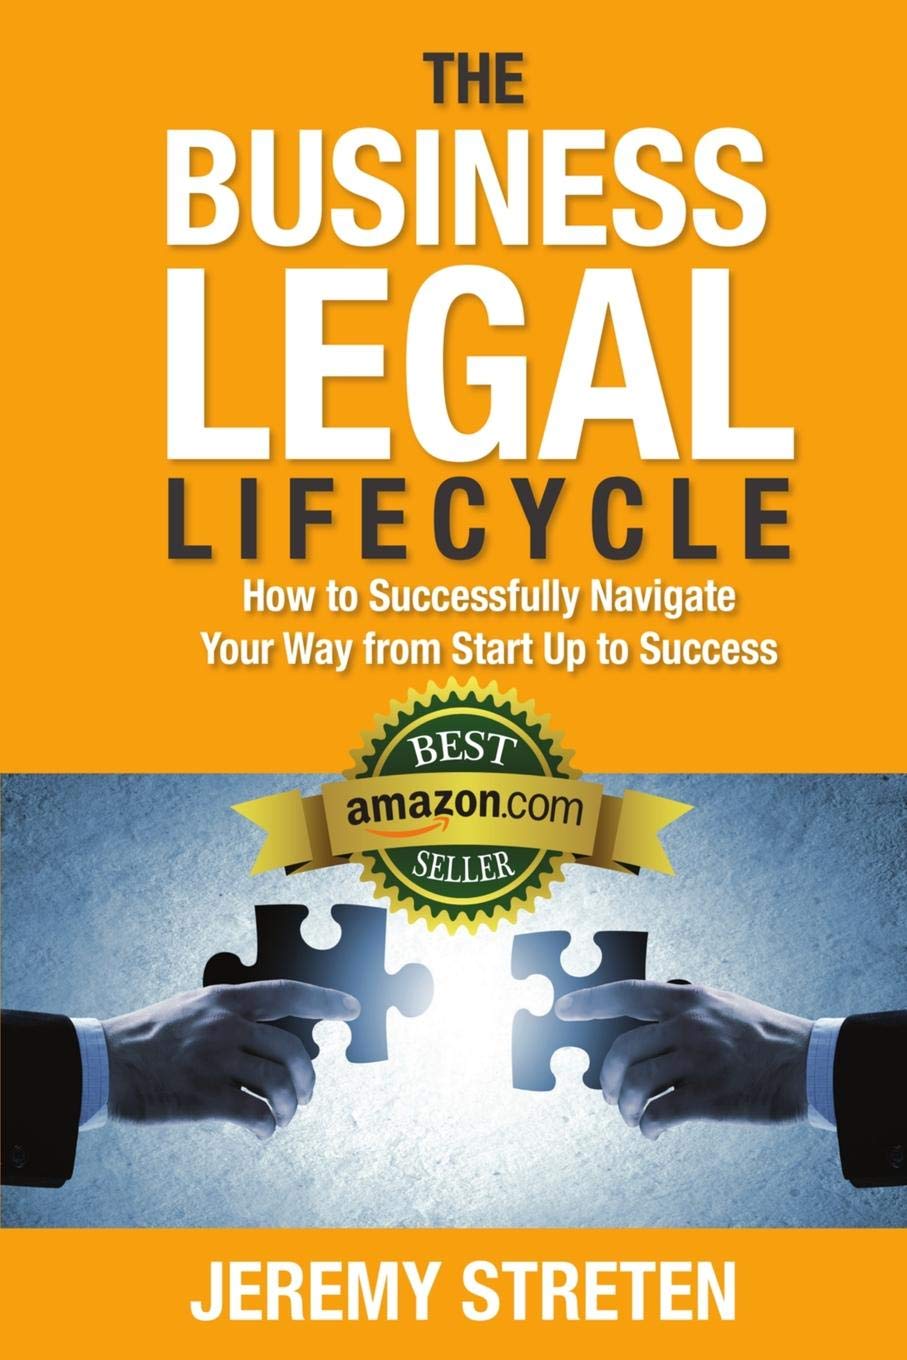 Pre Order The Business Legal Lifecycle Today